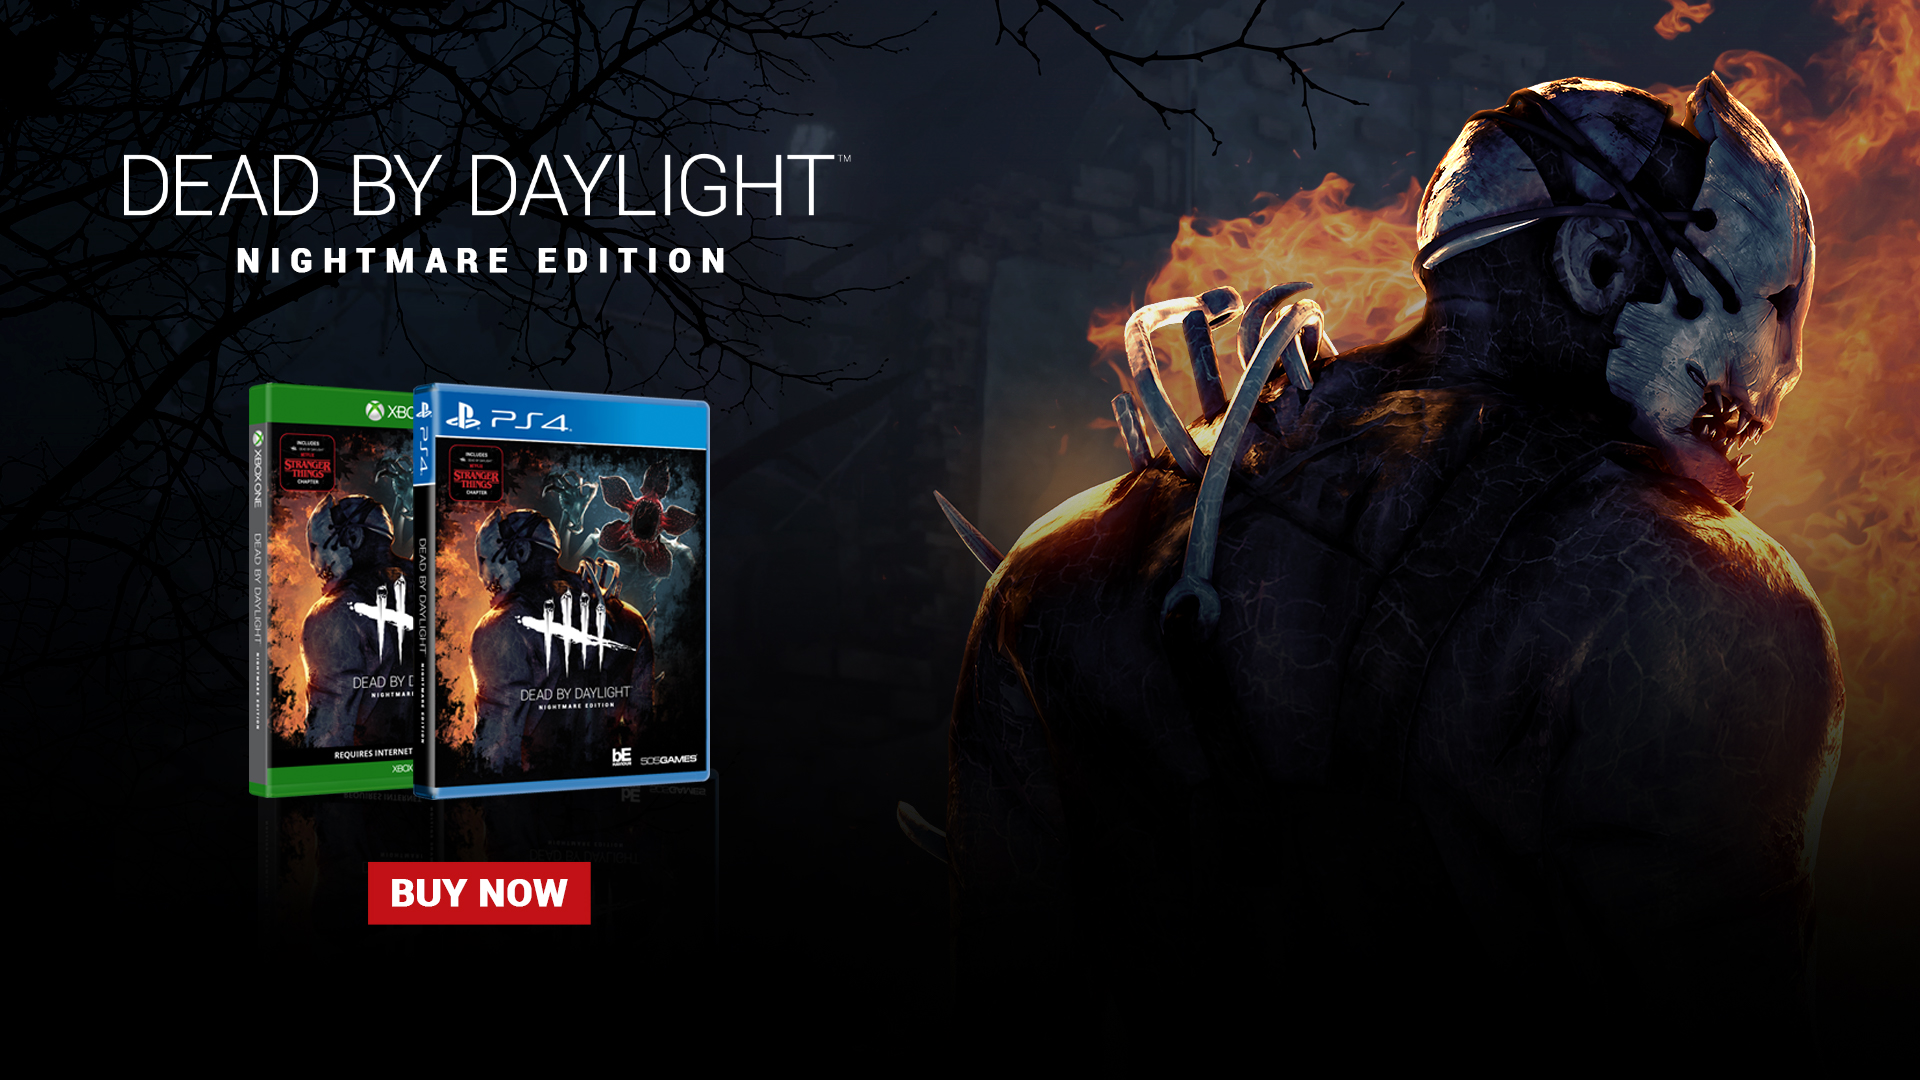 Dead By Daylight Dead By Daylight Nightmare Edition Including The Stranger Things Chapter Is Available Now At Retail For Playstation 4 And Xbox One In North America And Europe T Co 97scmeyvpg